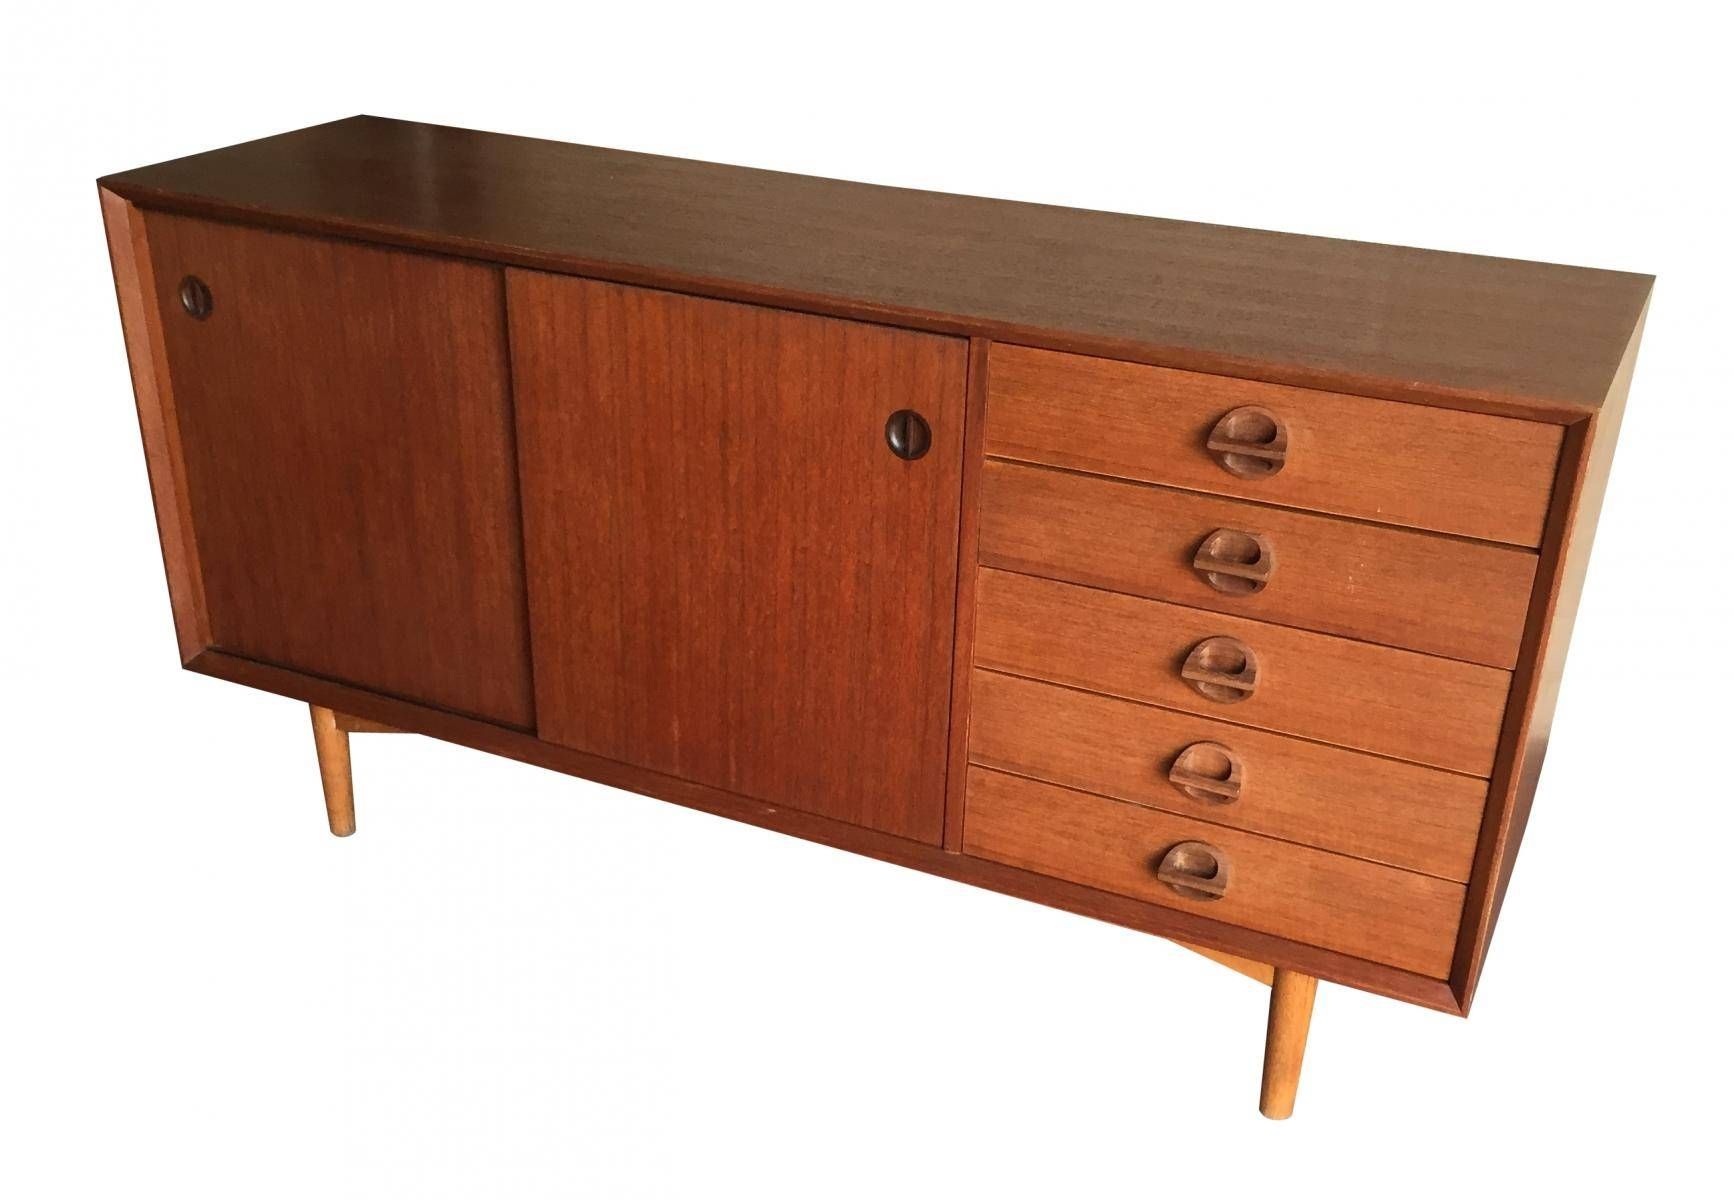 Vintage Sideboard With Sliding Doors, 1960s For Sale At Pamono Pertaining To Recent 60 Inch Sideboards (View 14 of 15)